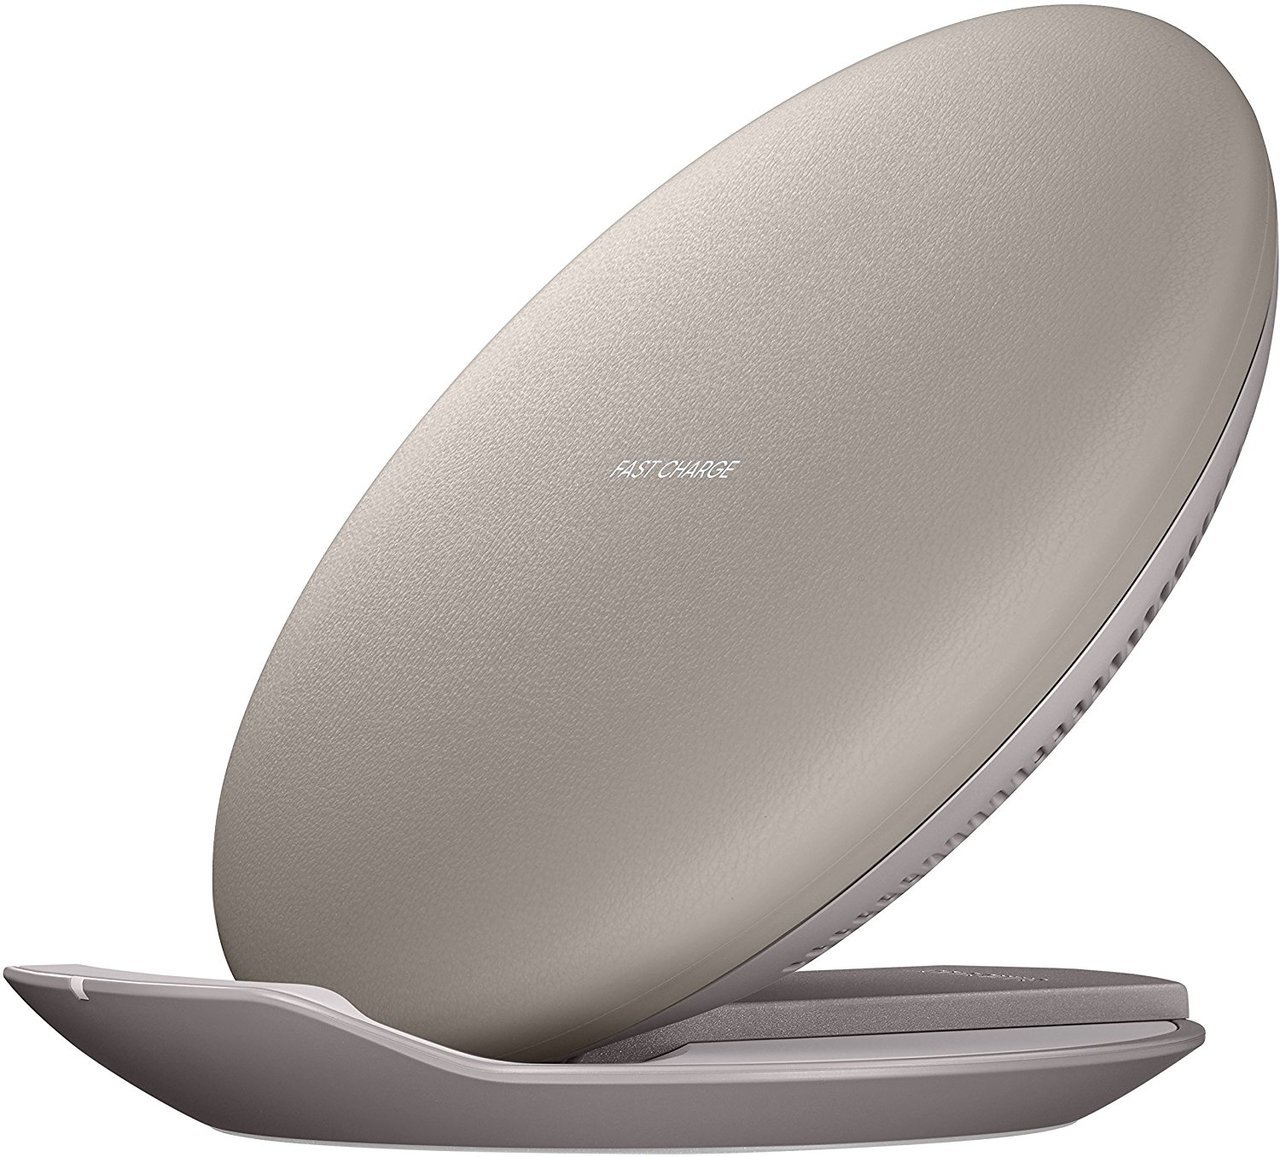 Samsung Fast Charge Wireless Charging Convertible, Tan